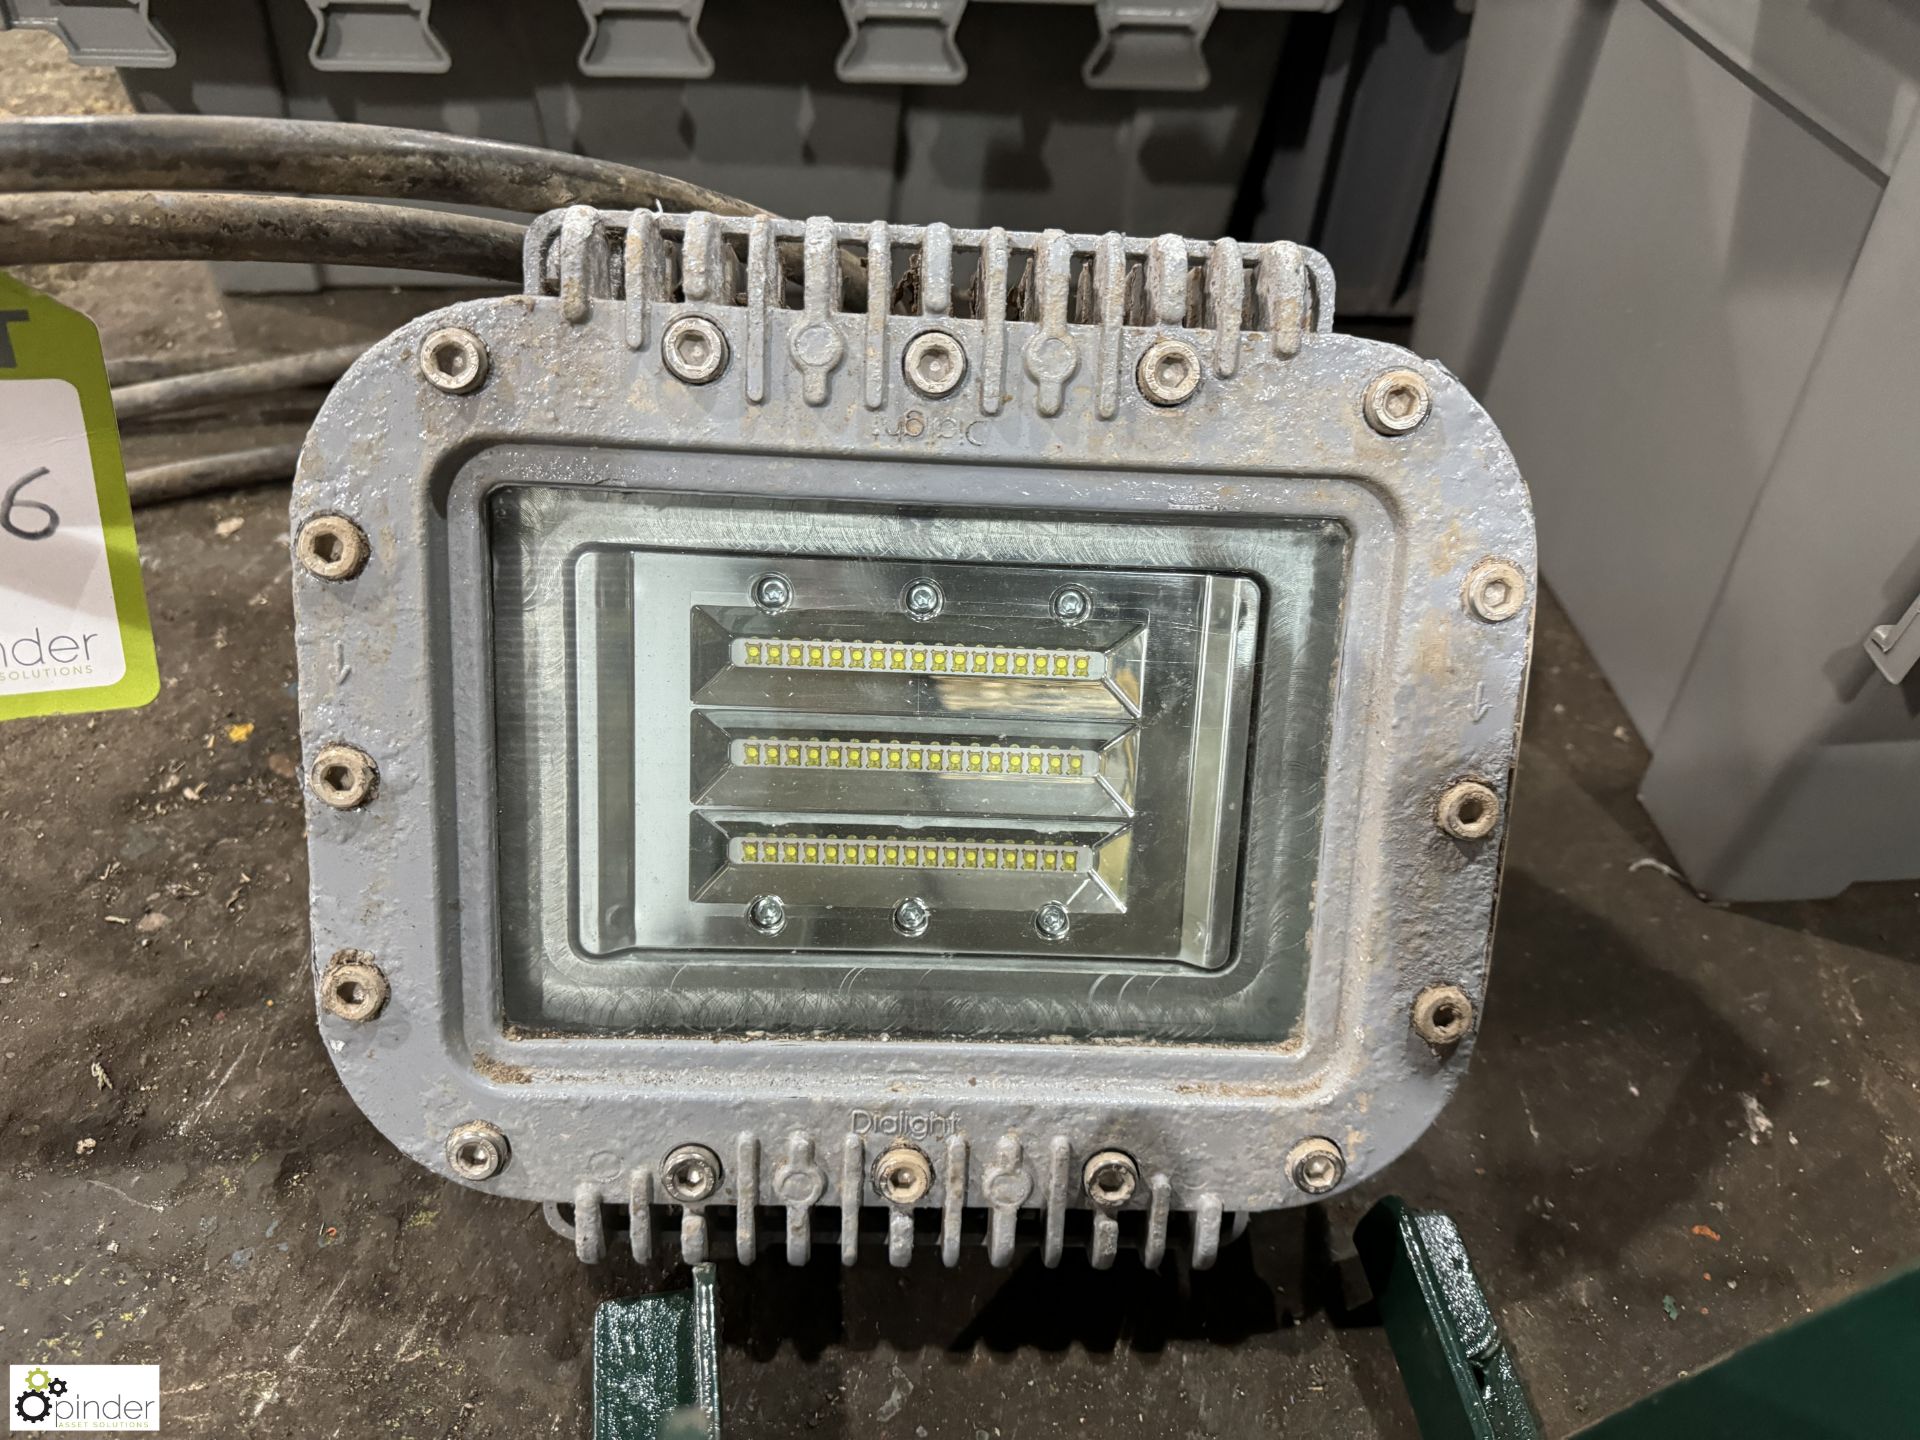 2 LED Outdoor Floodlights - Image 2 of 4